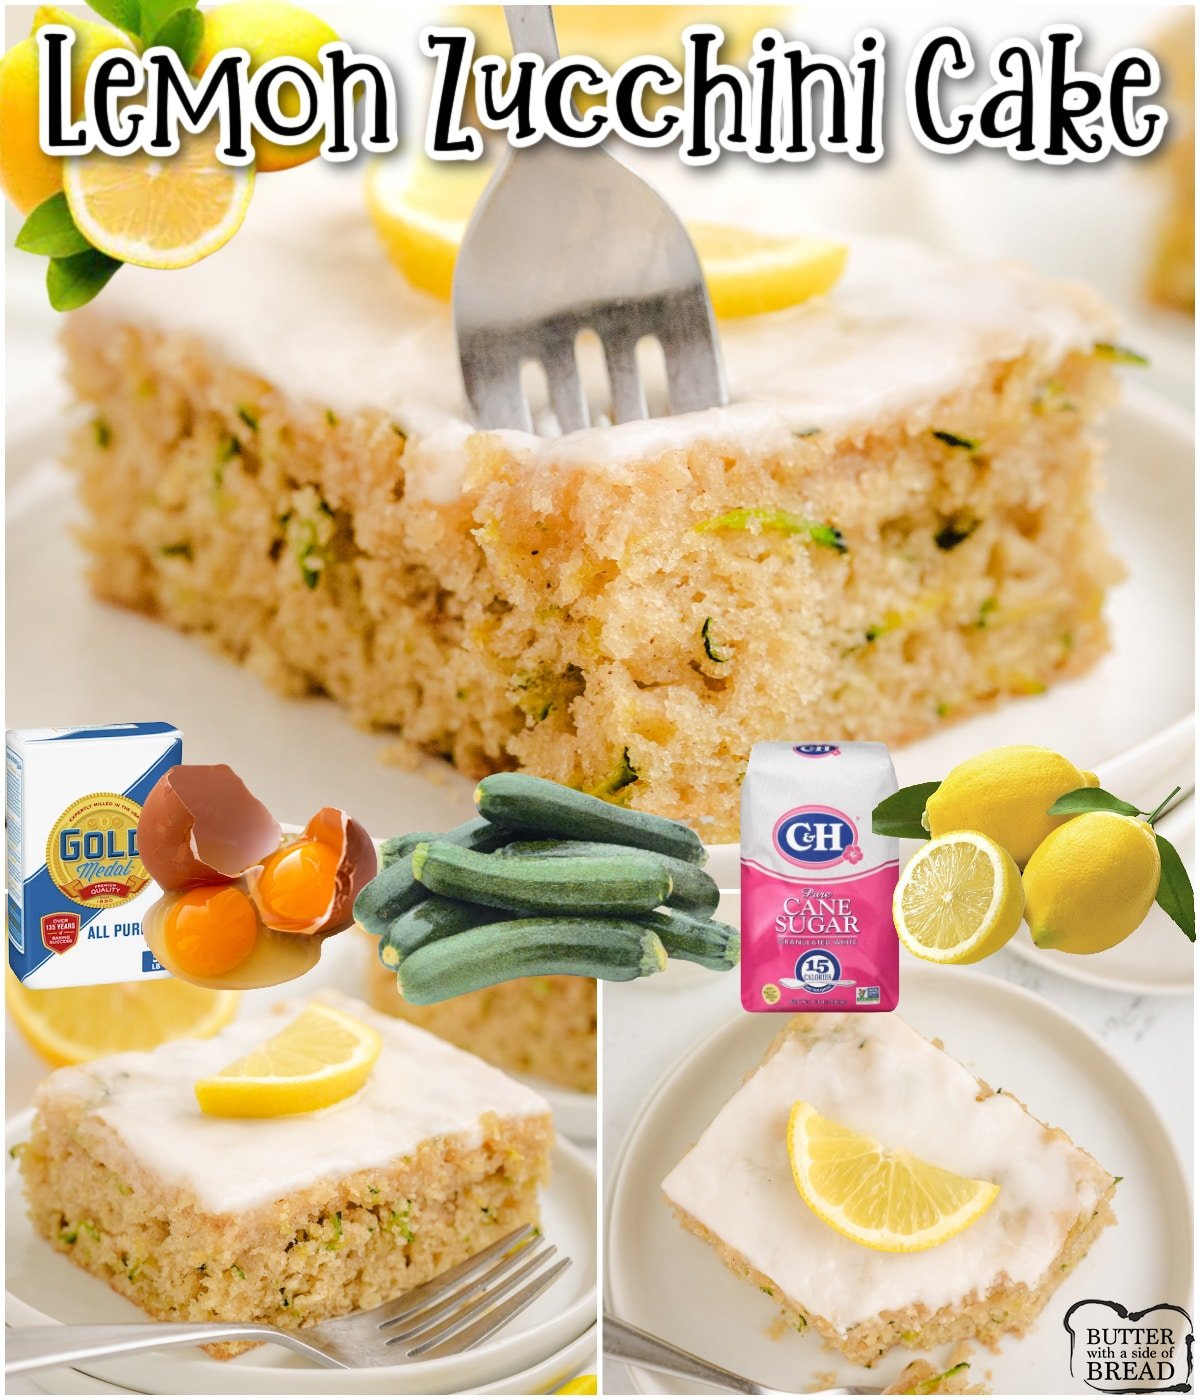 Light & tangy Lemon Zucchini Cake is made with basic ingredients including fresh zucchini! A simple, flavorful cake topped with a sweet lemon icing that compliments the cake perfectly!